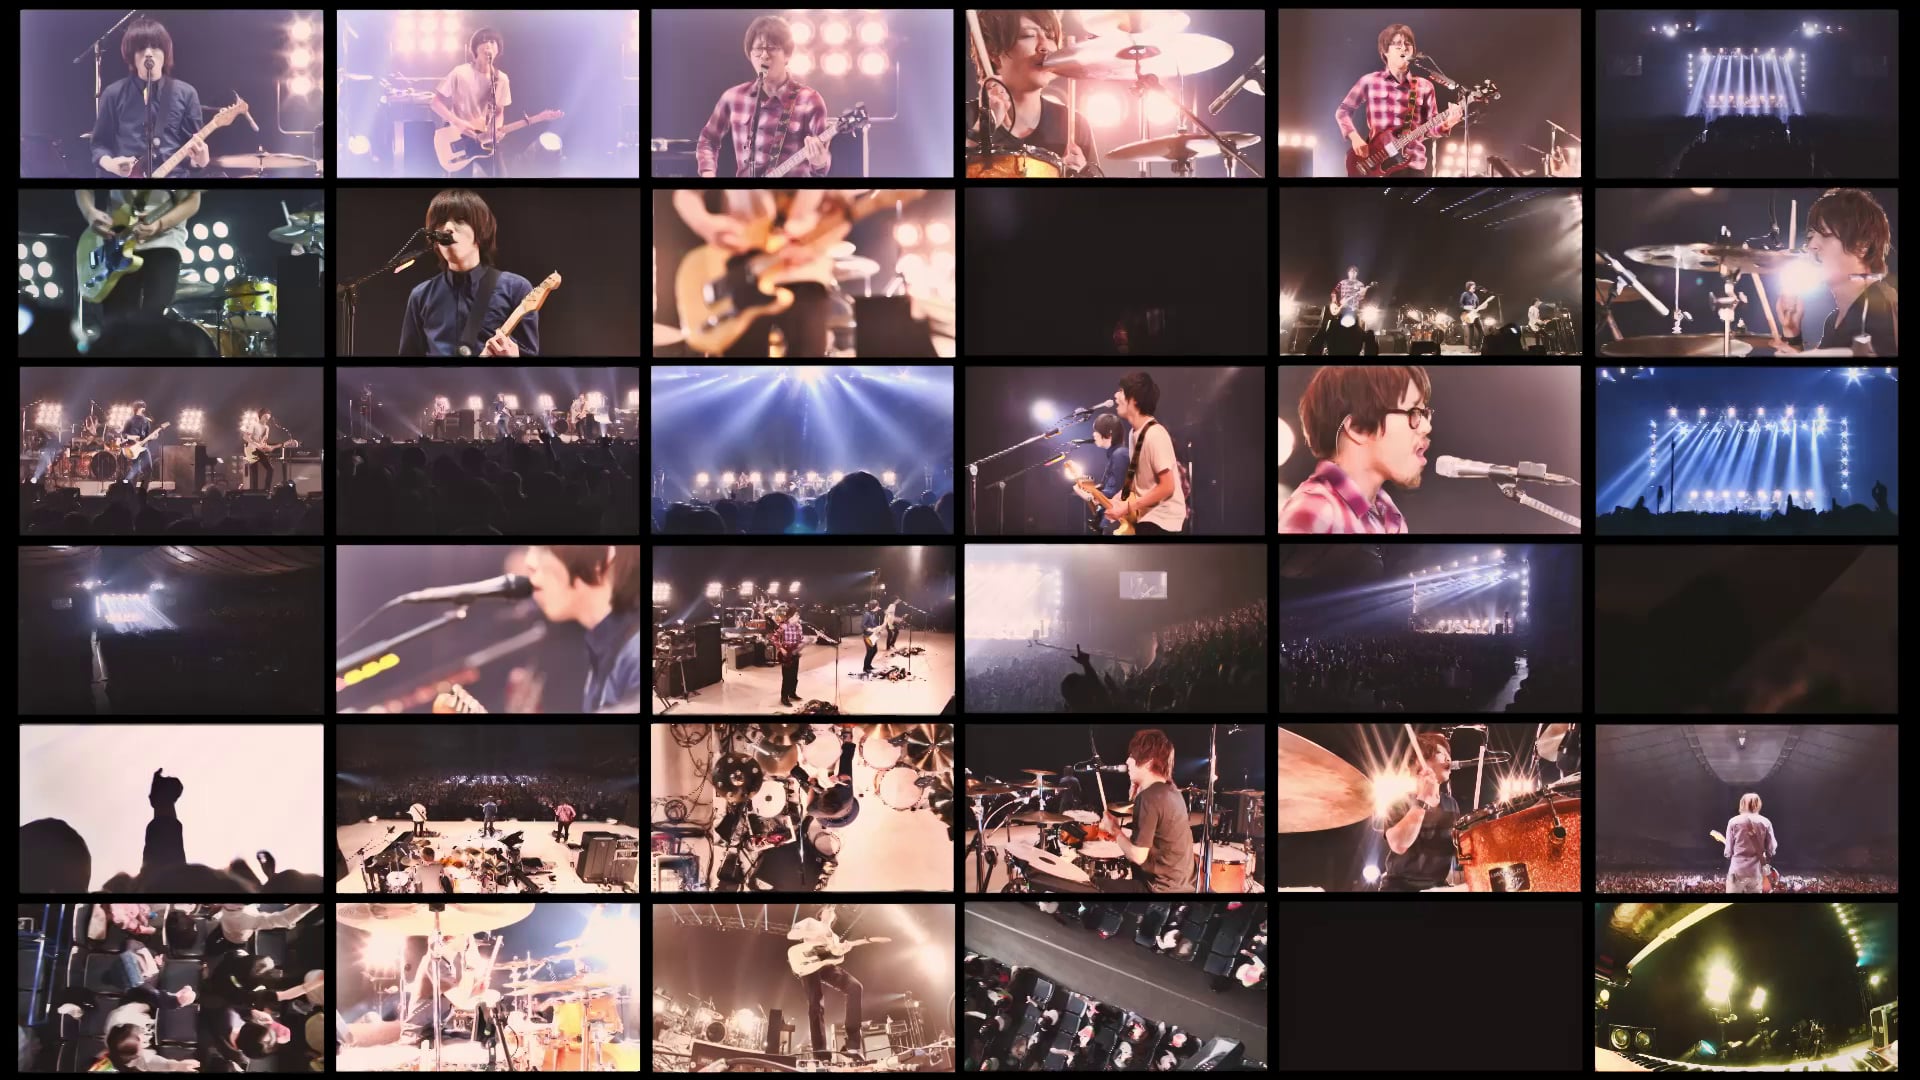 androp LIVE DVD & Blu-ray one-man live 2014 at Yoyogi National Stadium  teaser movie by 36 cams